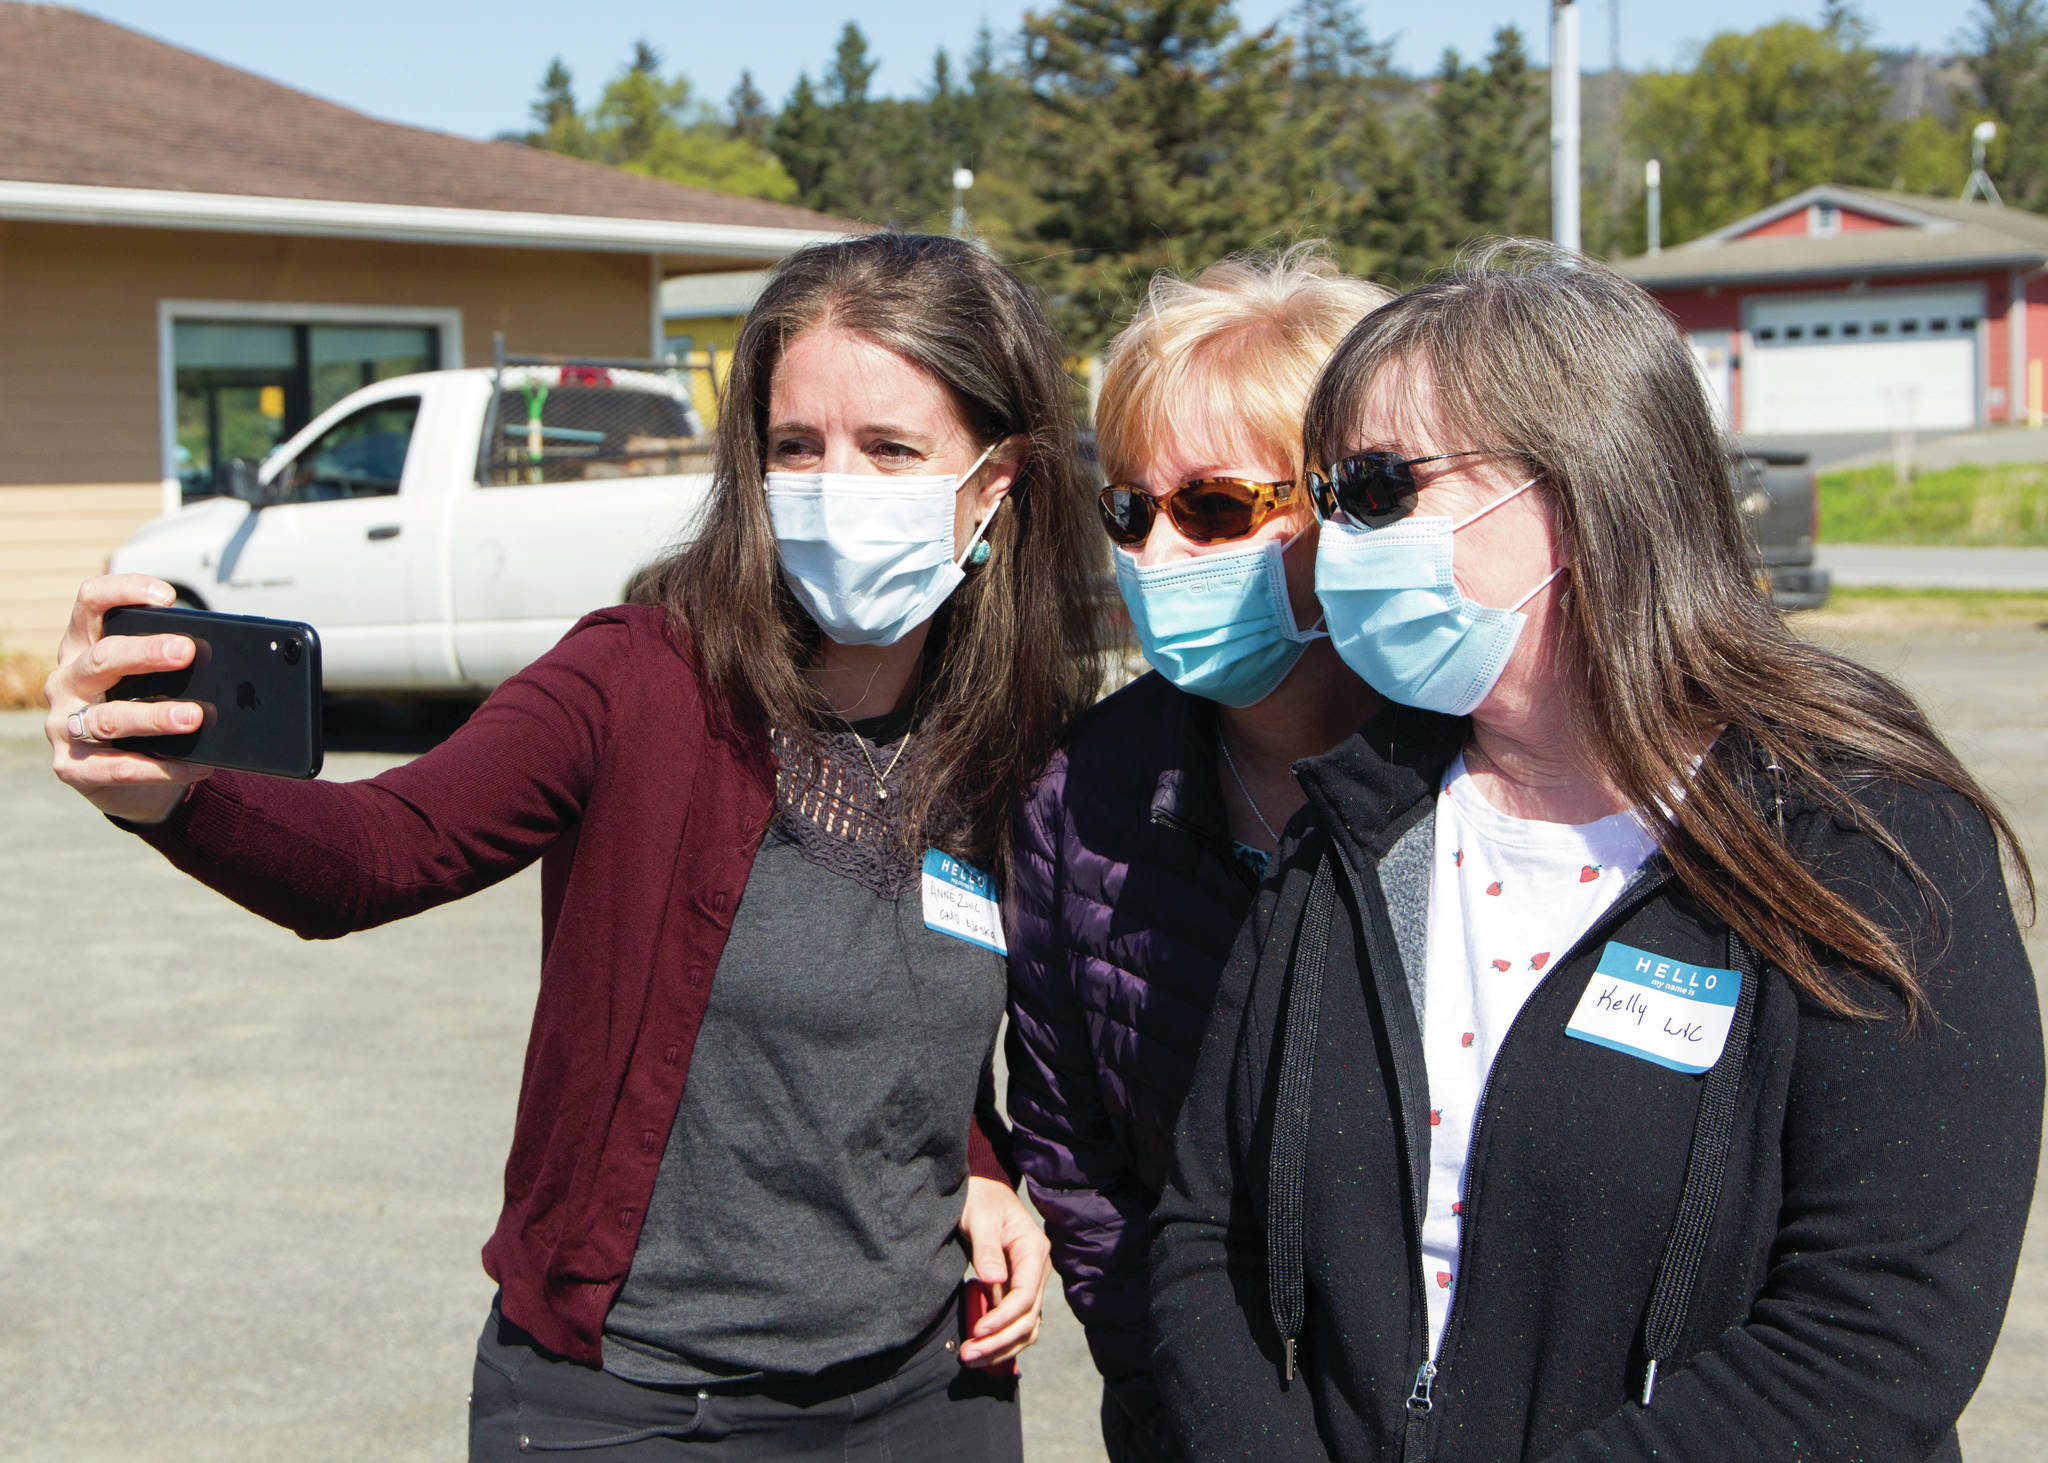 Photo by Sarah Knapp/Homer News
Alaska Chief Medical Officer Anne Zink, M.D., left, poses for a selfie with Kelly Bolt, right, and Debbie Gardner, center, who work at WIC, at a meet-and-greet on Thursday, May 27, 2021, at the Homer Public Health Center in Homer, Alaska.